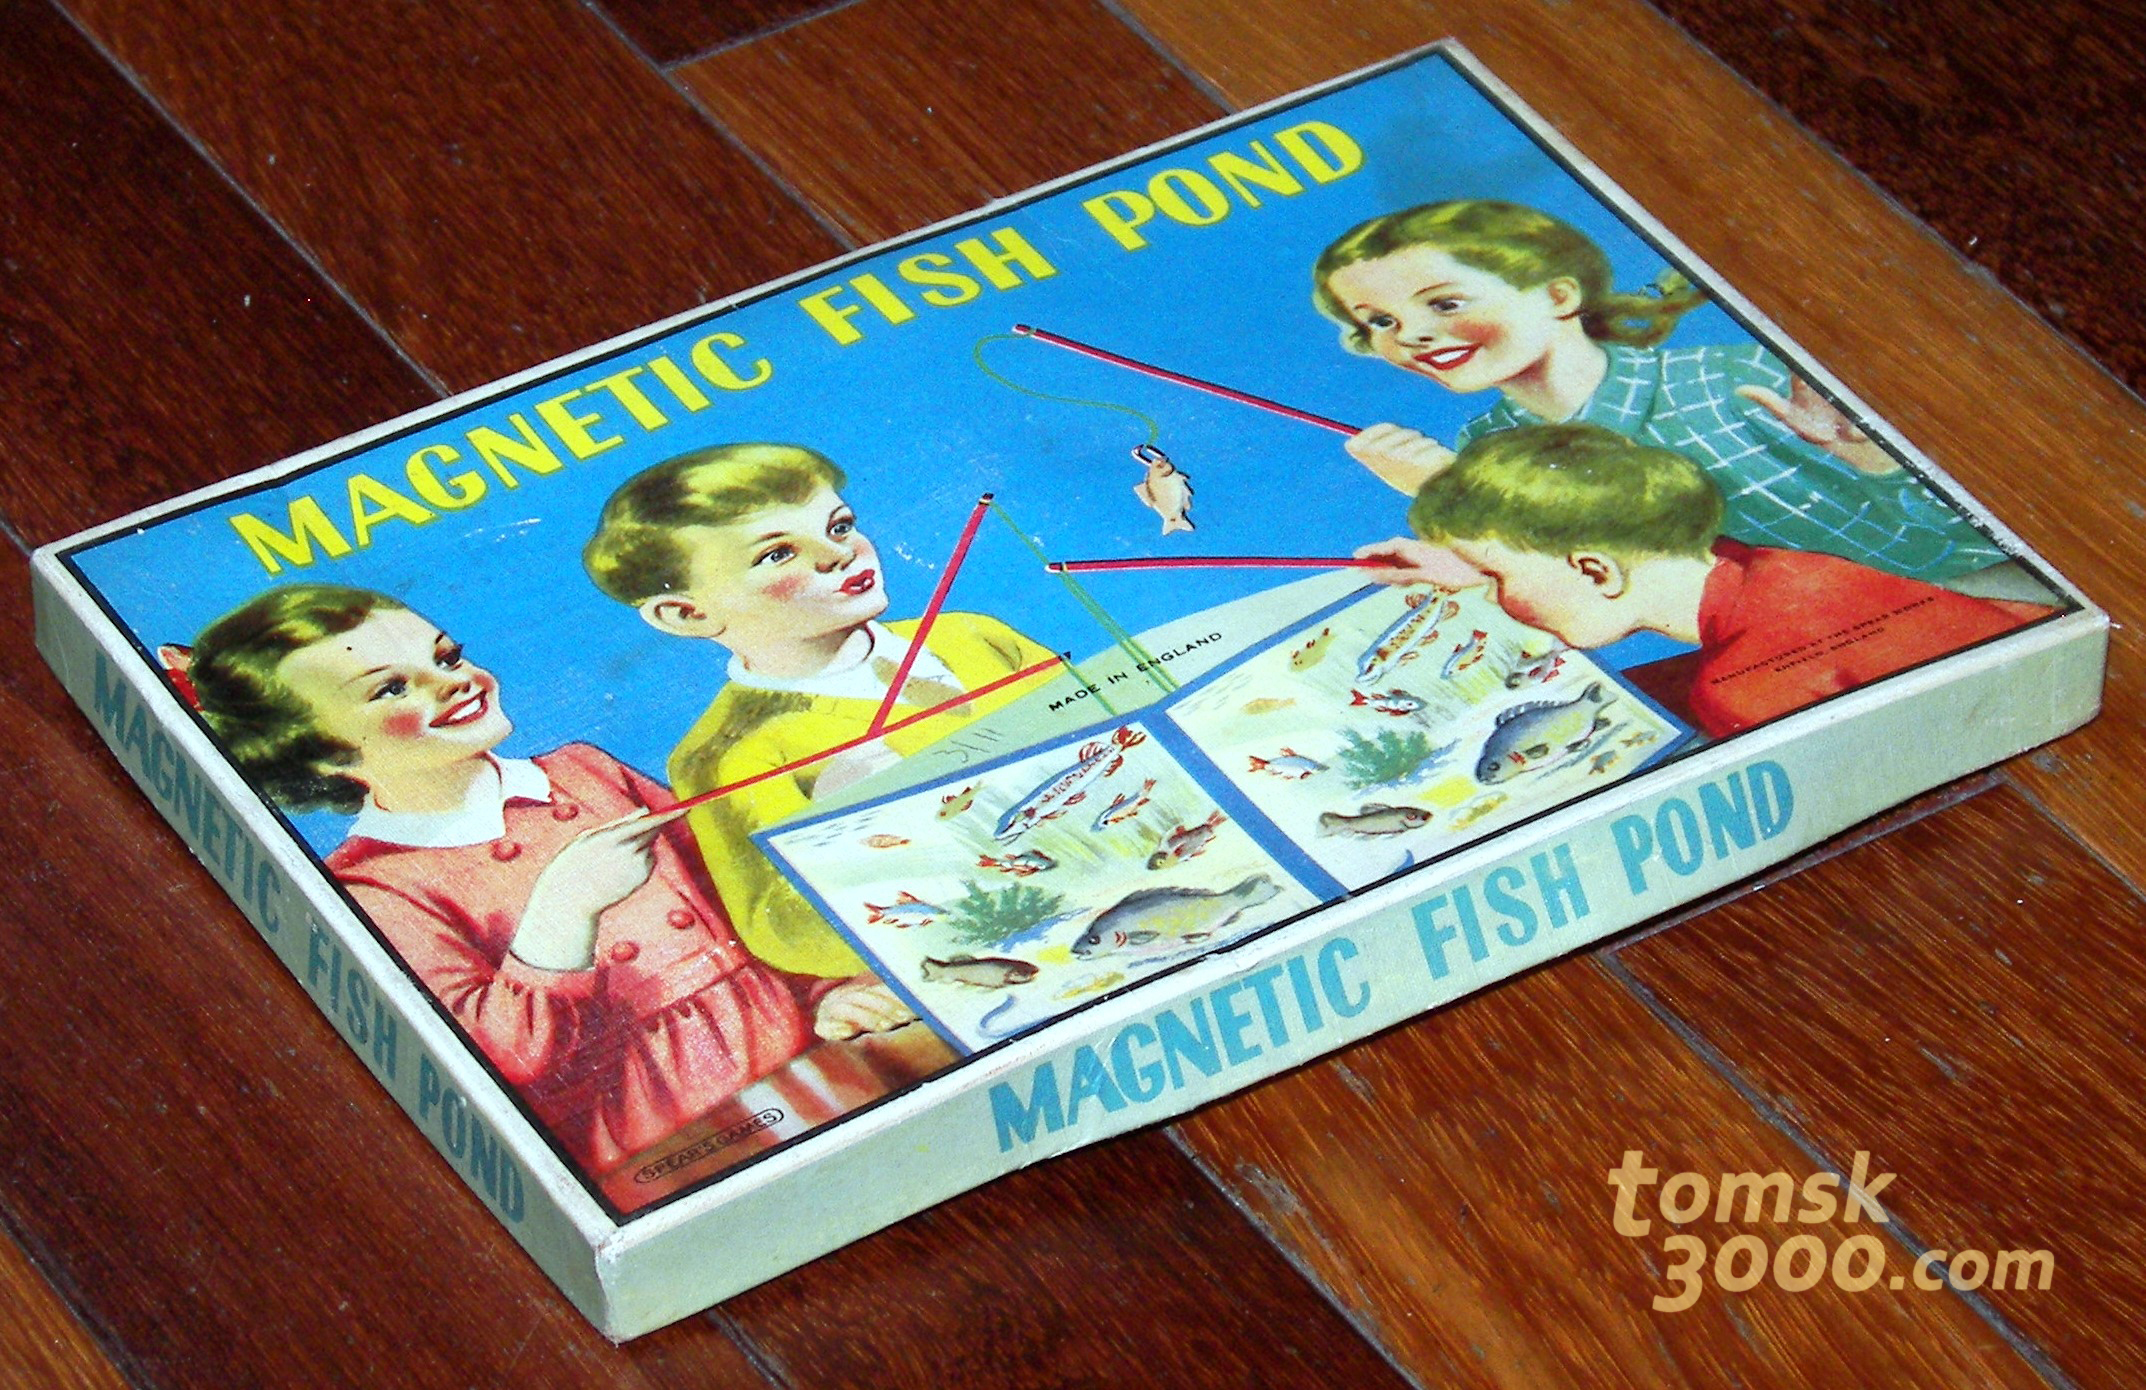 1950's Magnetic Fish Pond Game by Spears, England